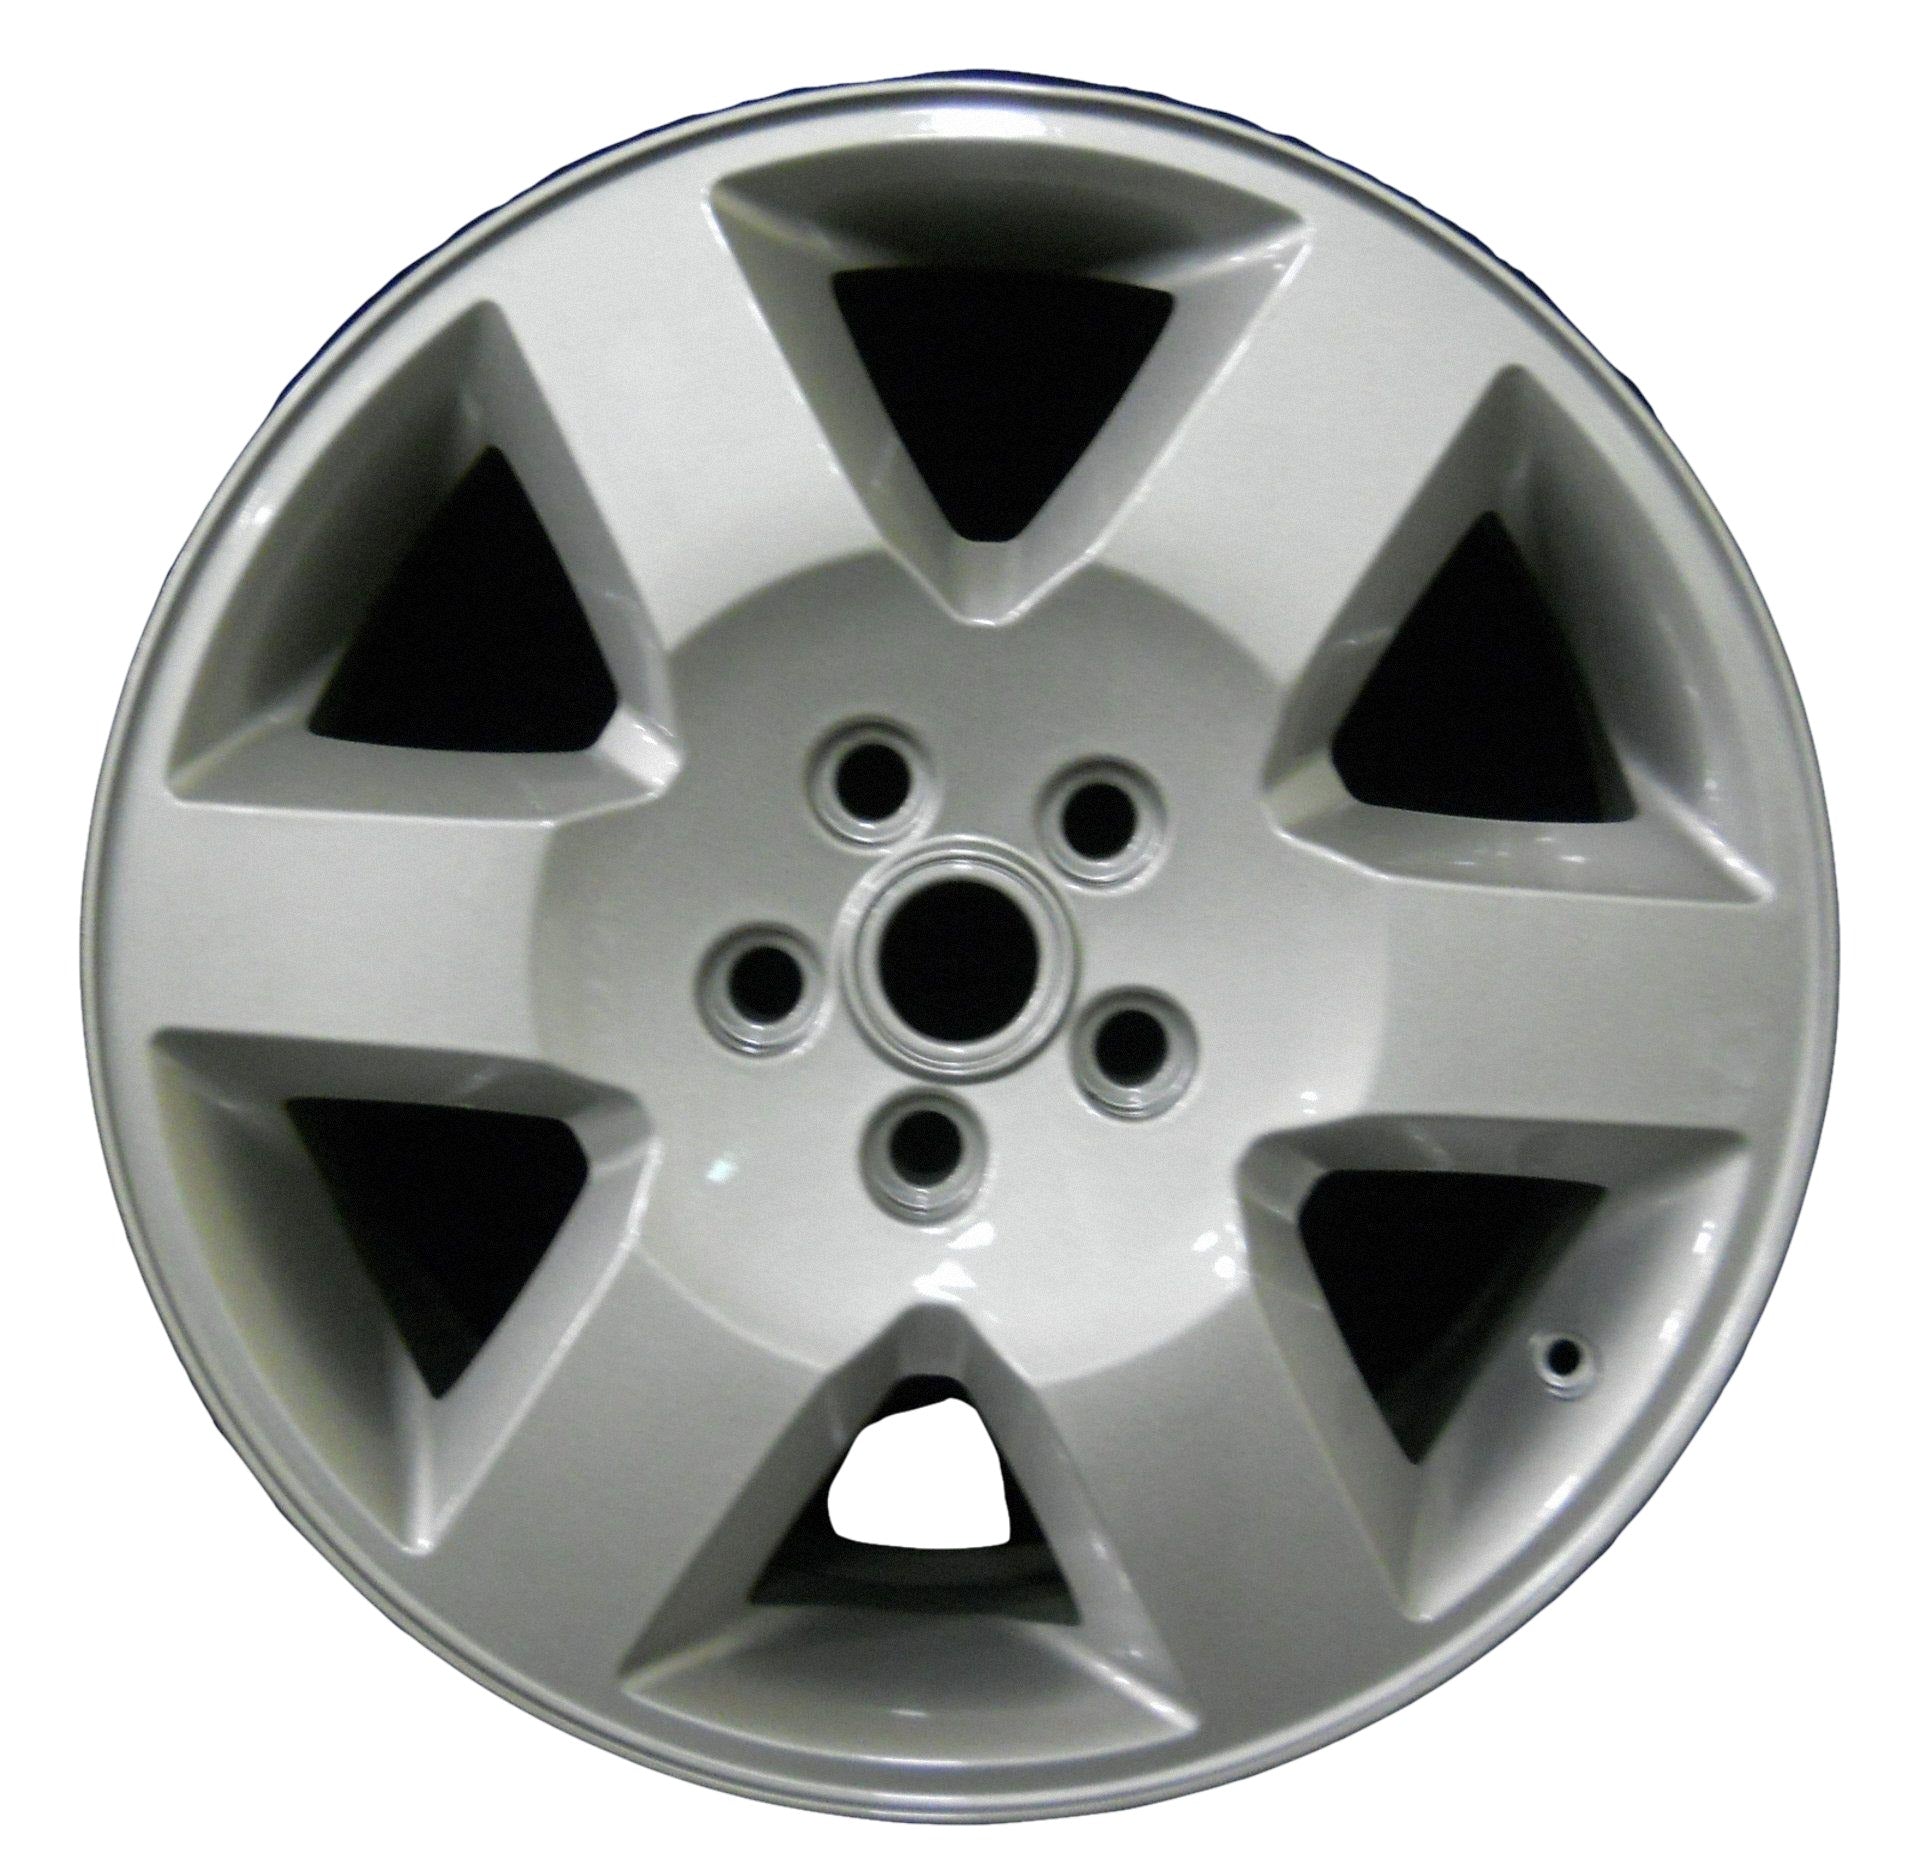 Land Rover Range Rover Sport  2006, 2007, 2008, 2009, 2010, 2011, 2012, 2013 Factory OEM Car Wheel Size 19x8 Alloy WAO.72191.PS02.FF